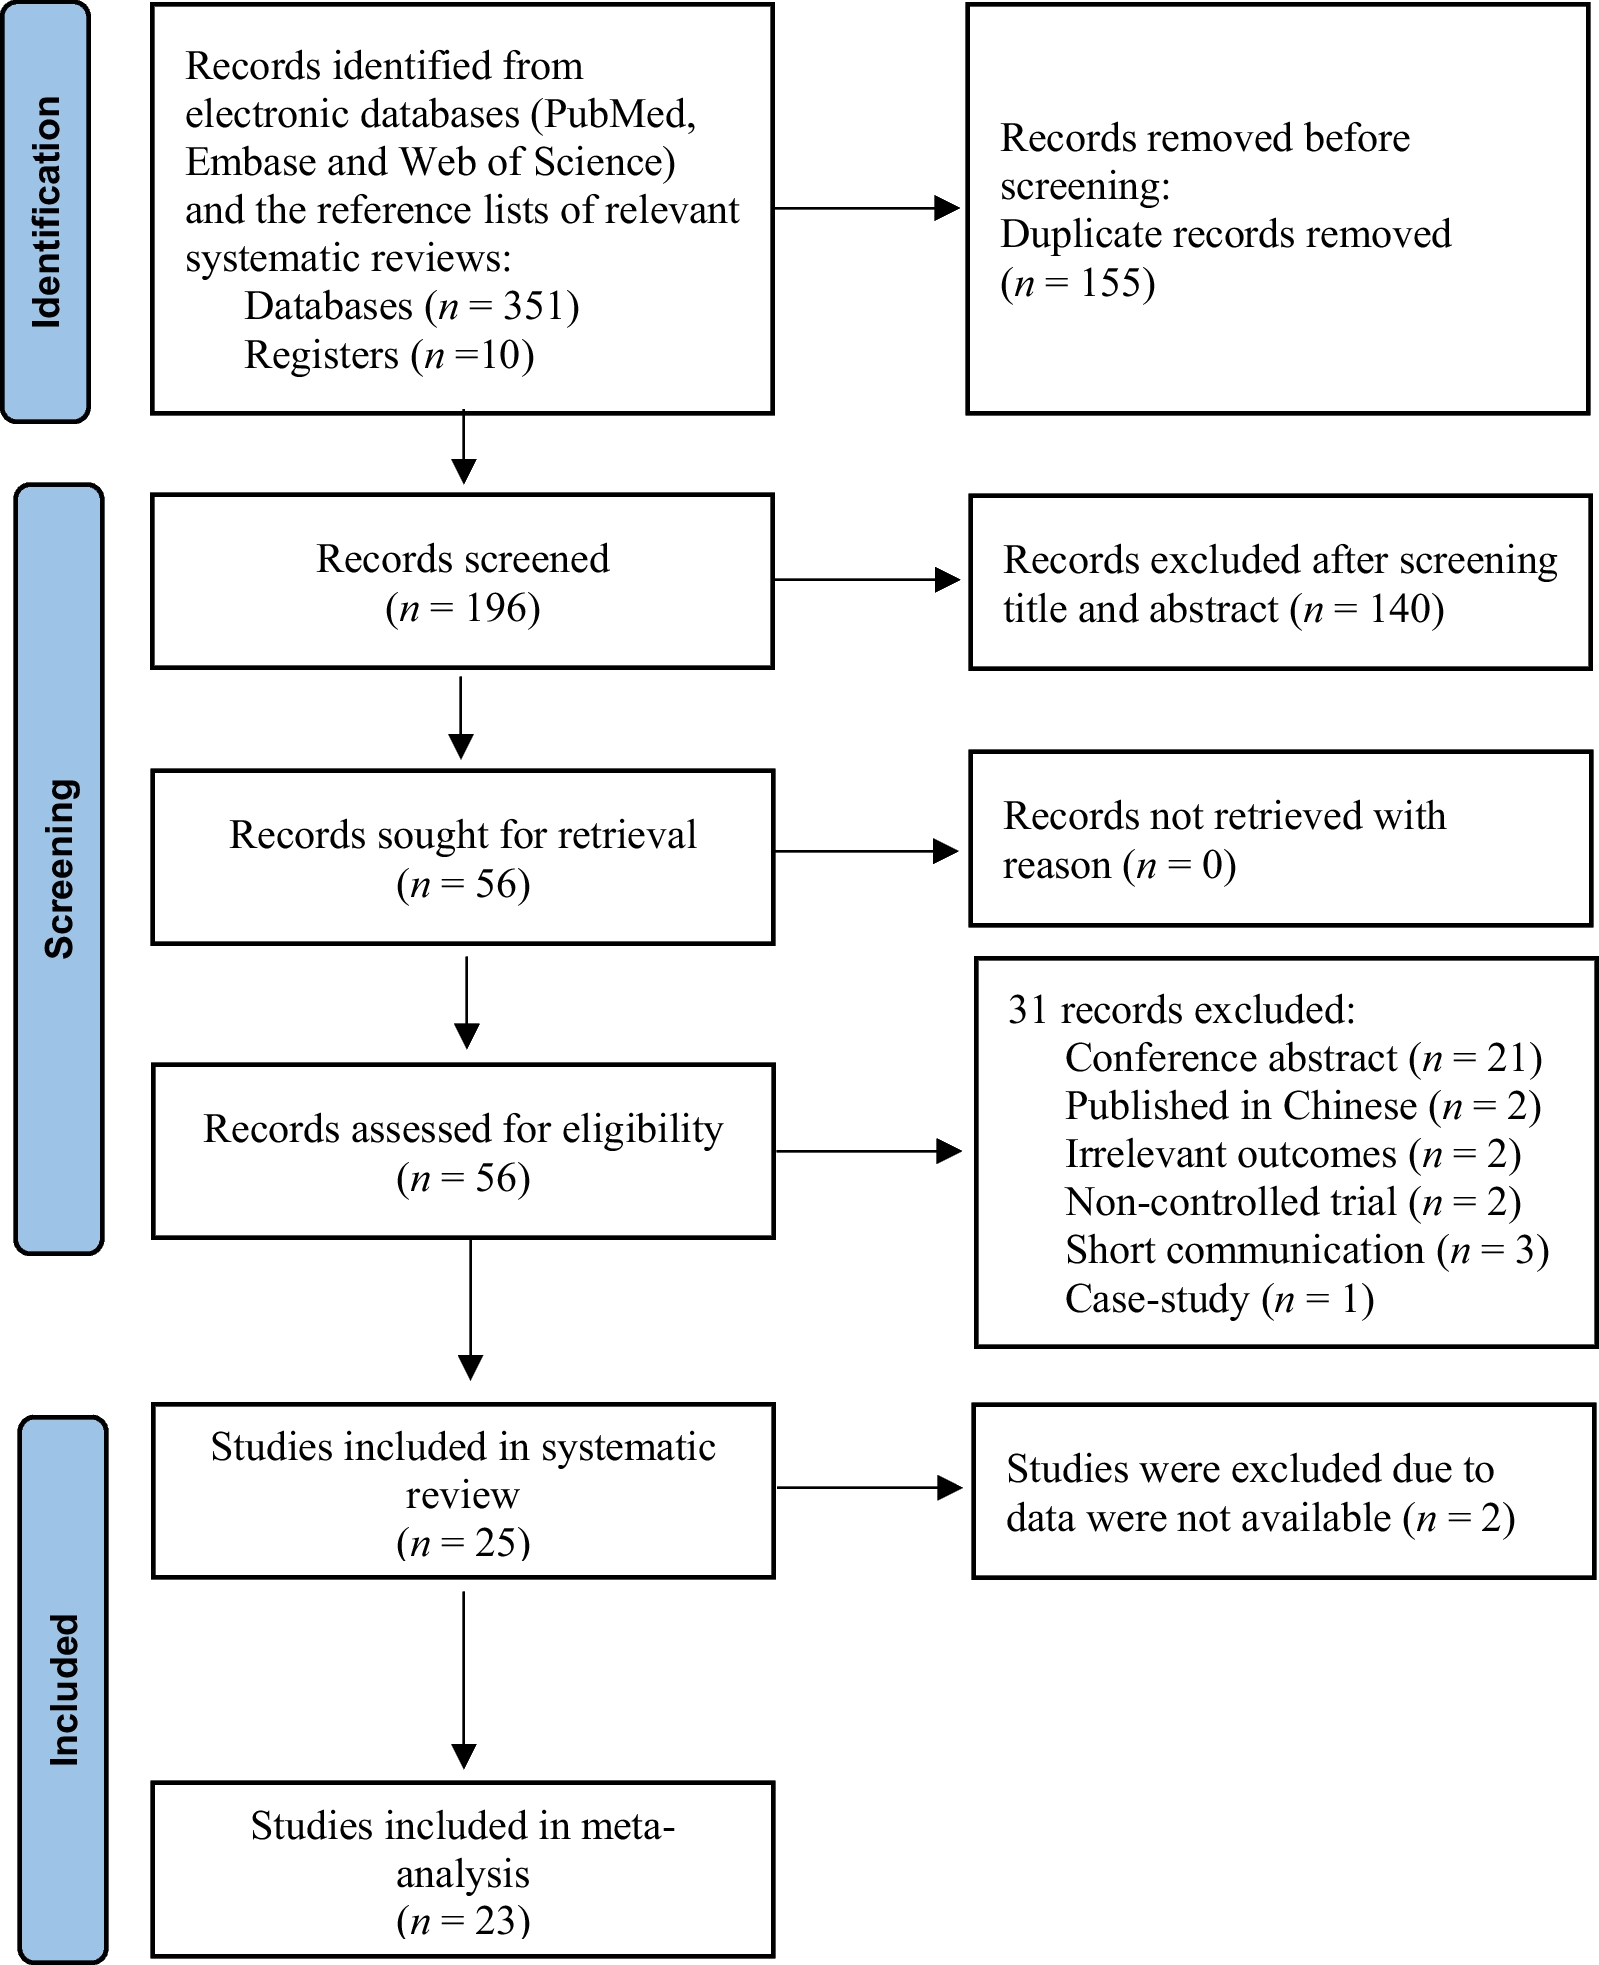 Effects of transcranial direct current stimulation alone and in combination with rehabilitation therapies on gait and balance among individuals with Parkinson’s disease: a systematic review and meta-analysis